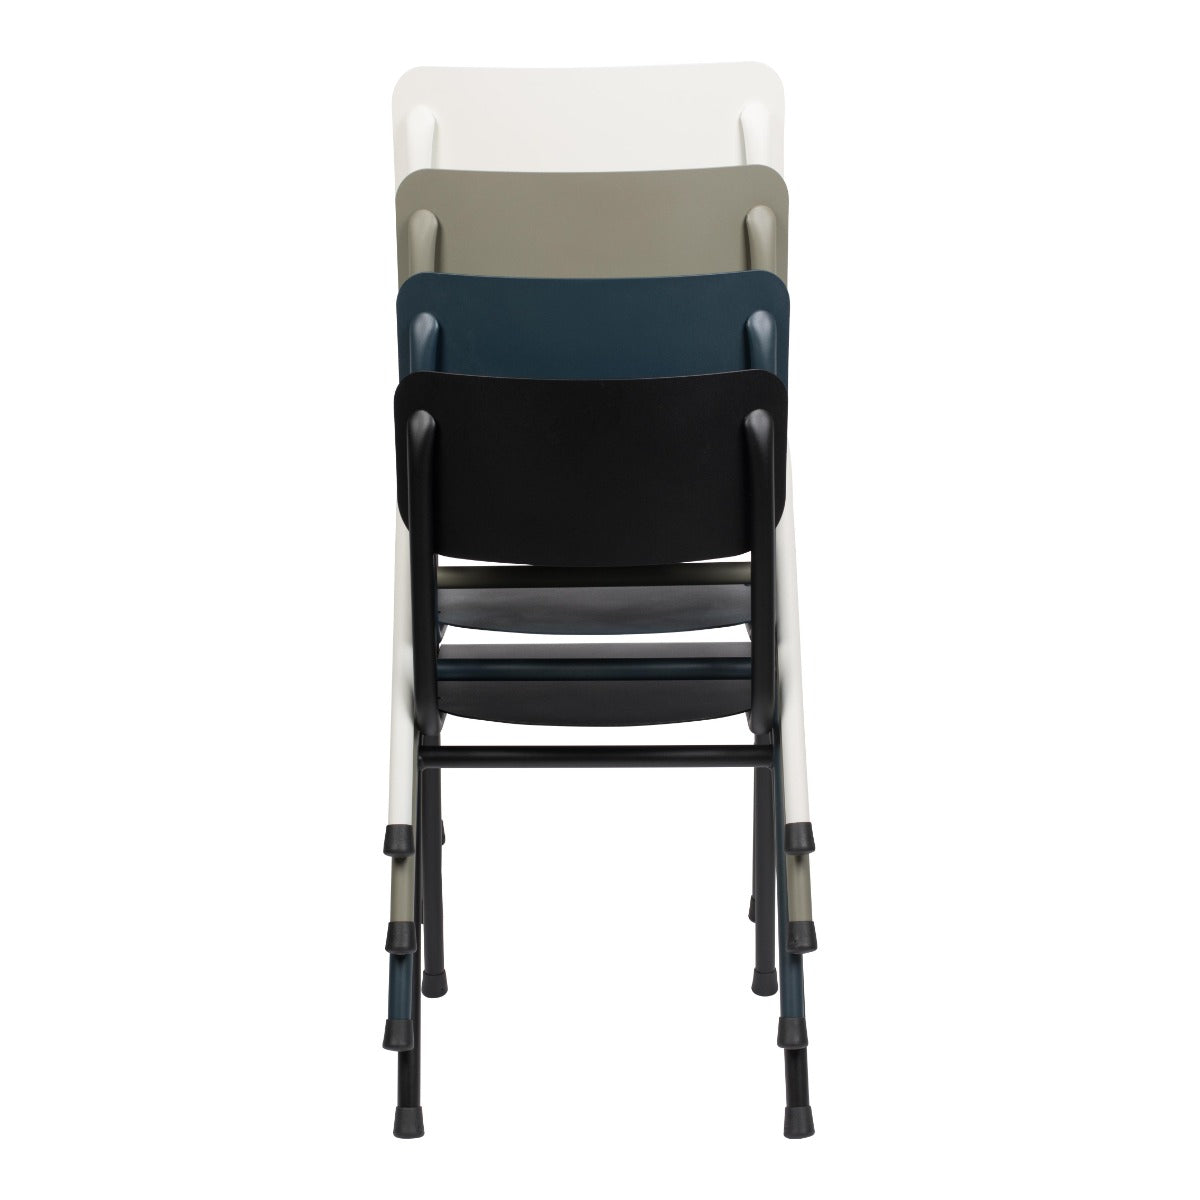 BACK TO SCHOOL outdoor chair white, Zuiver, Eye on Design